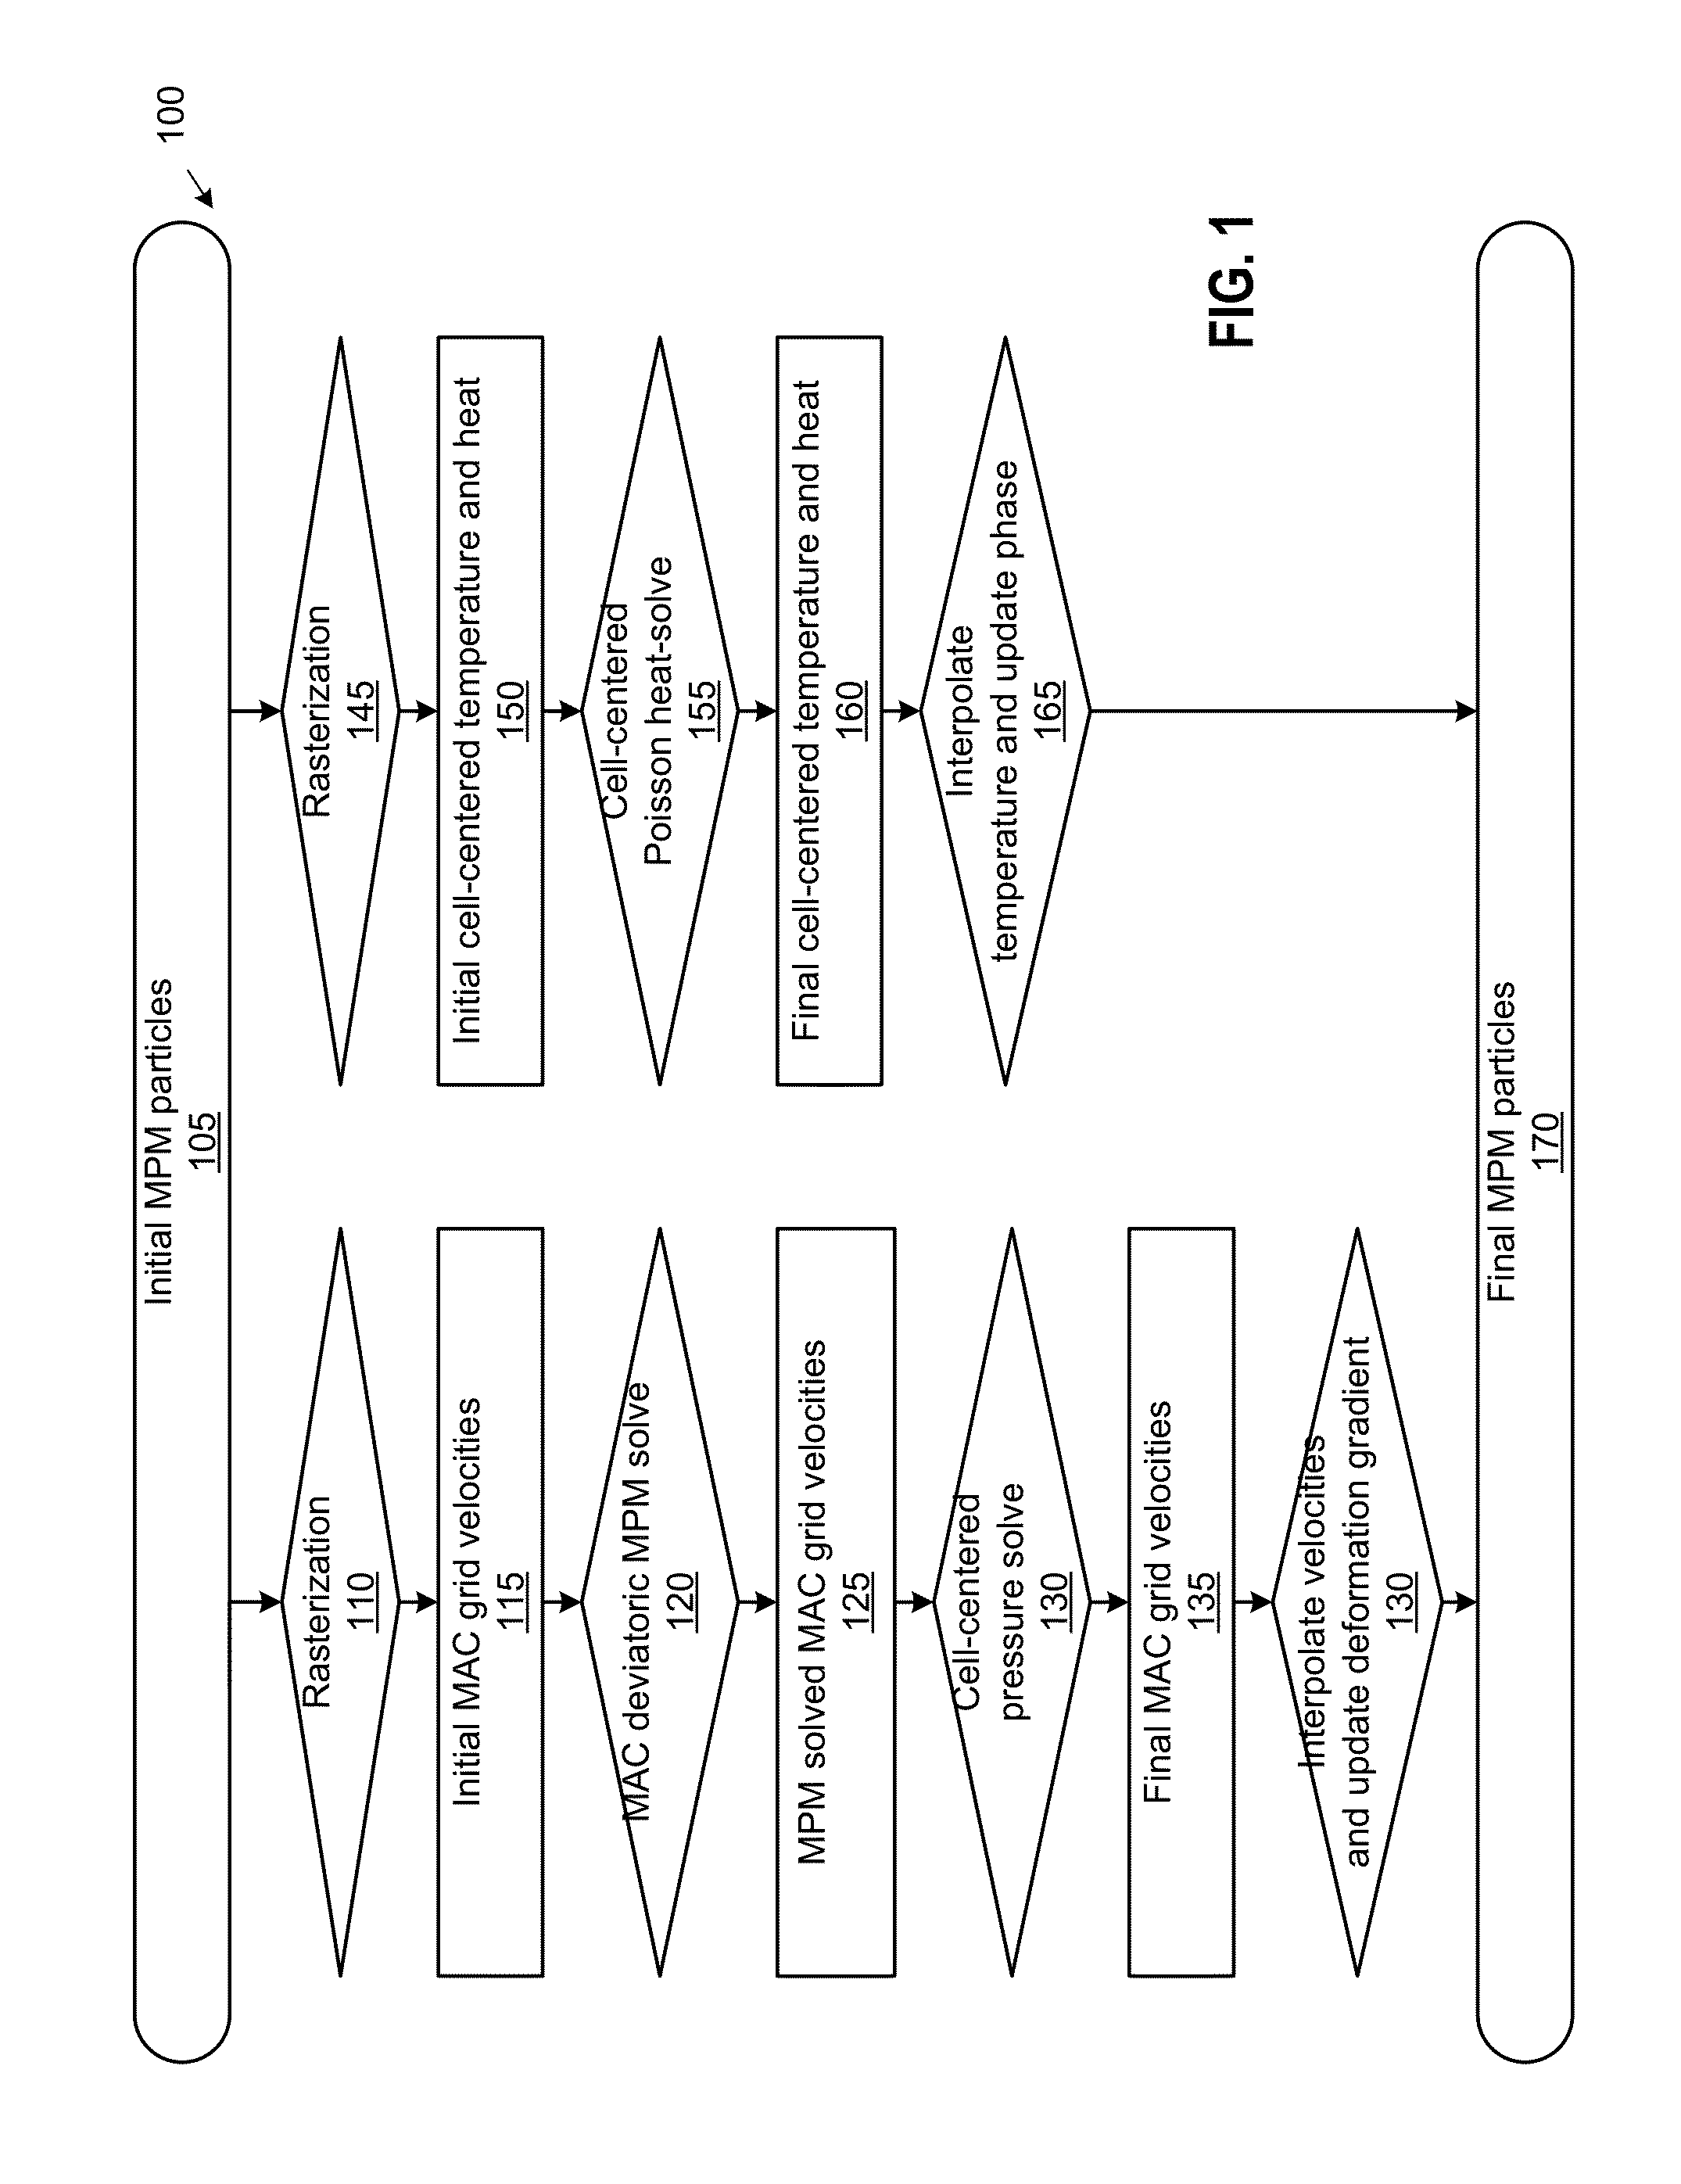 Augmented material point method for simulating phase changes and varied materials